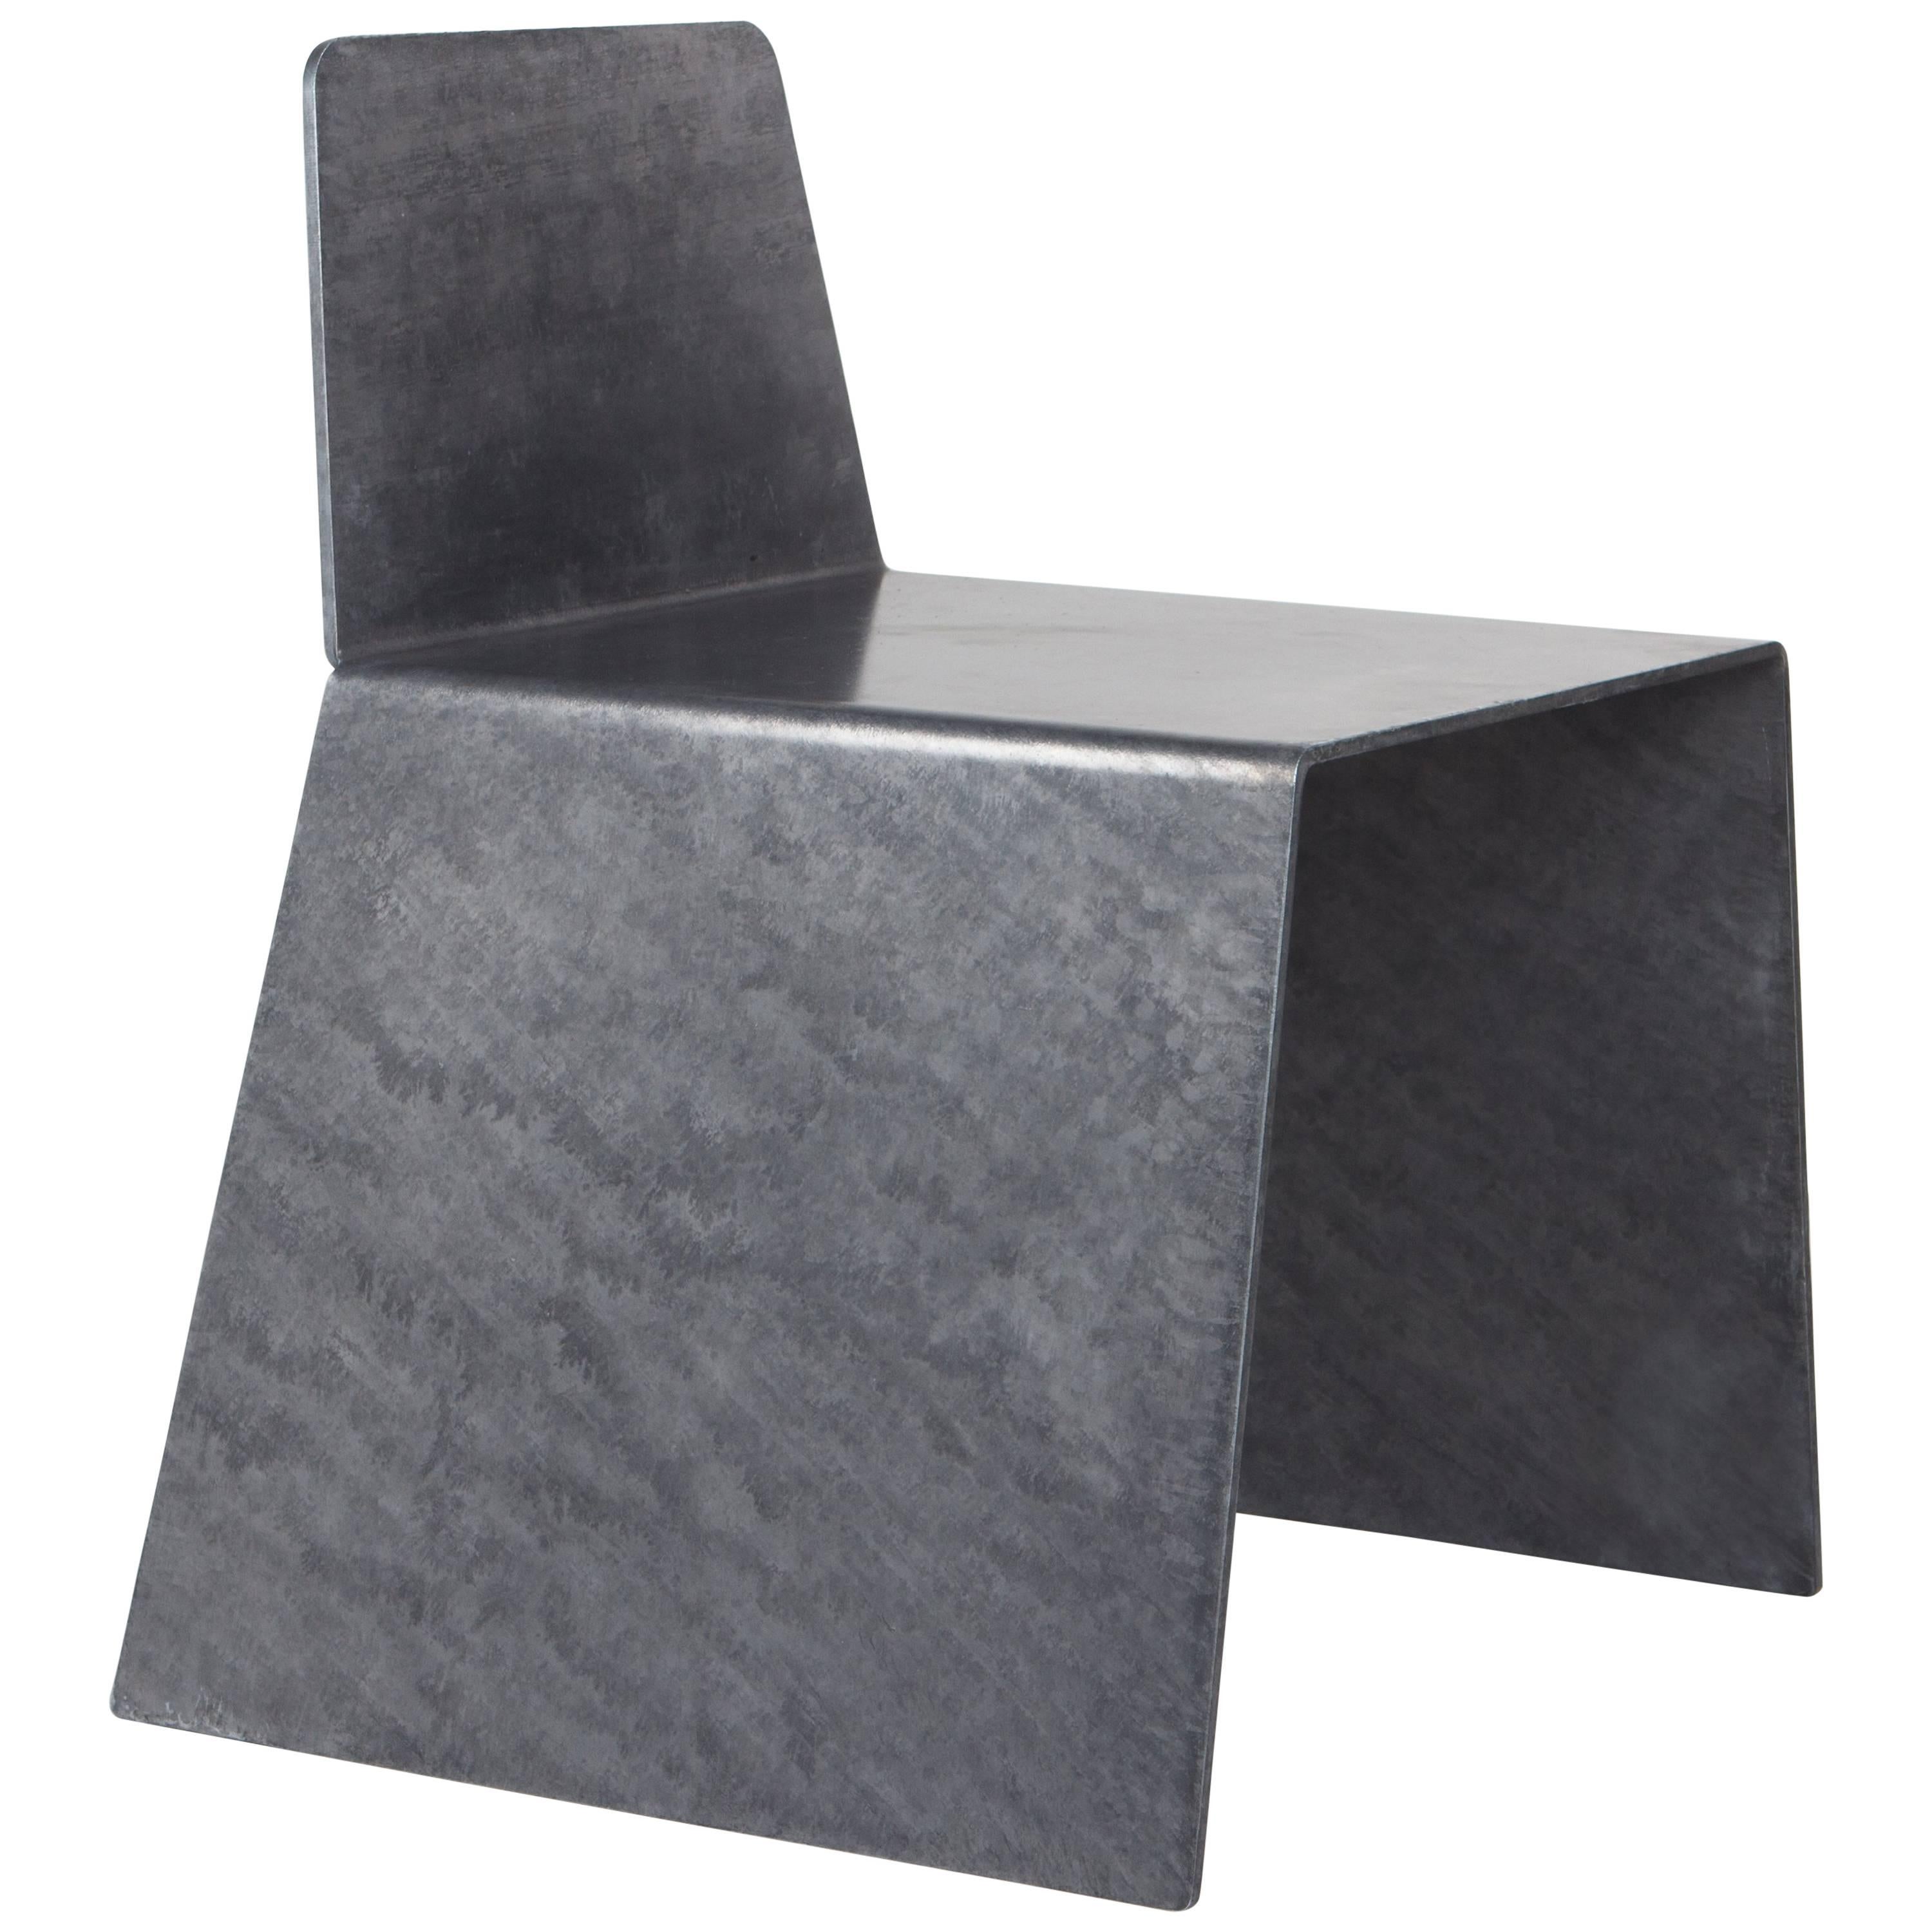 Steel side chair in hot-dipped galvanized steel. Made of one piece of .25